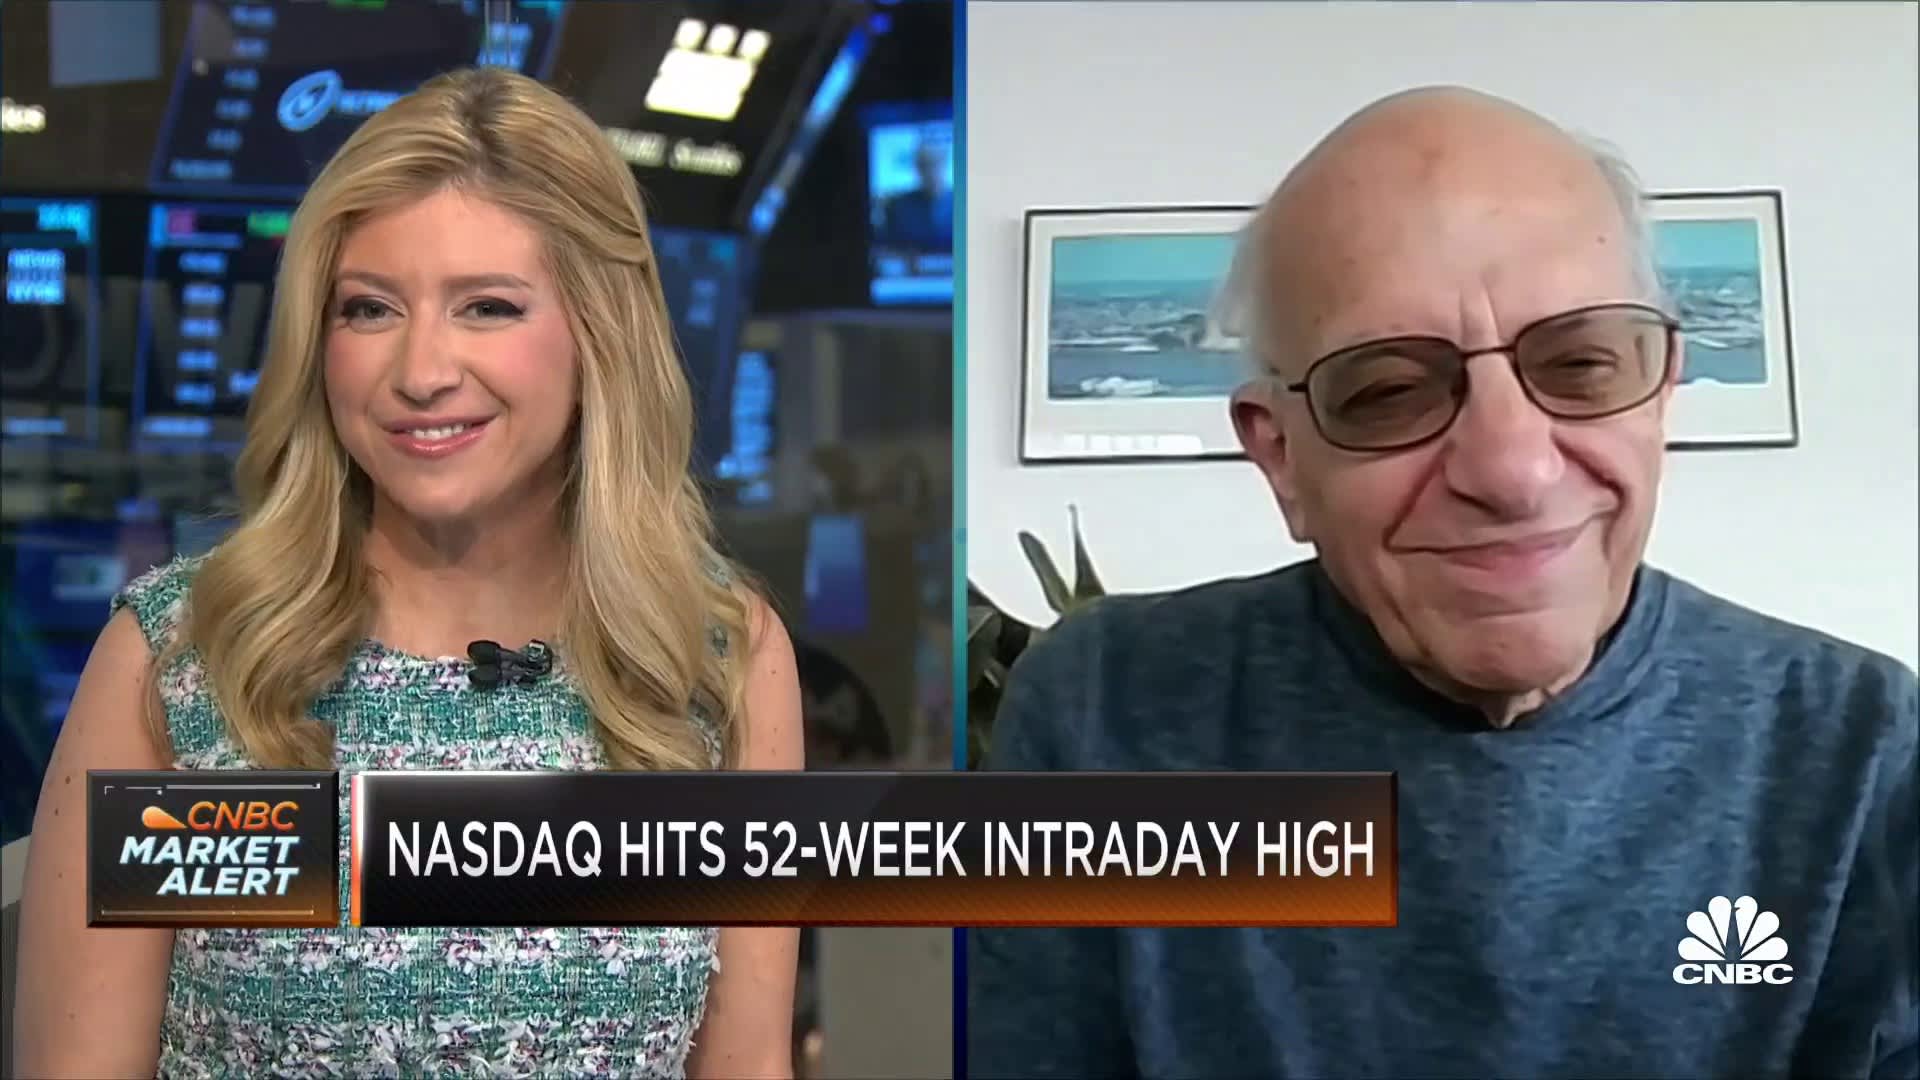 Watch CNBC's full interview with Wharton's Jeremy Siegel